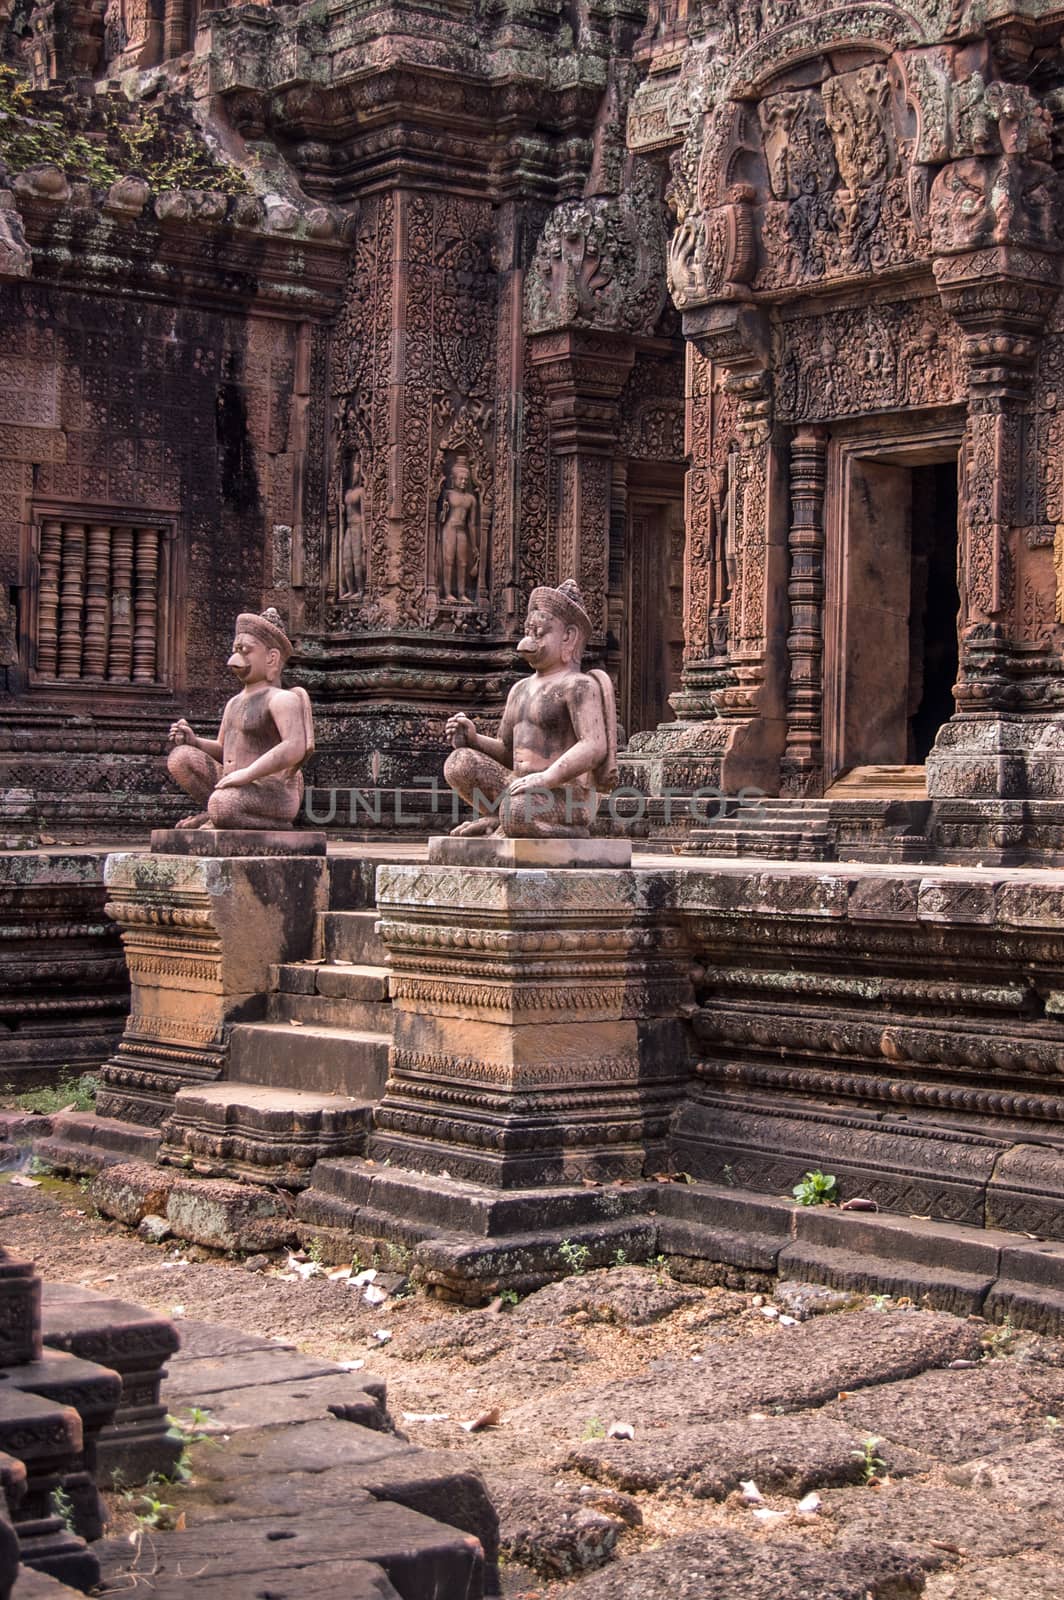 Guardian statues, Banteay Srei Temple, Cambodia by BasPhoto